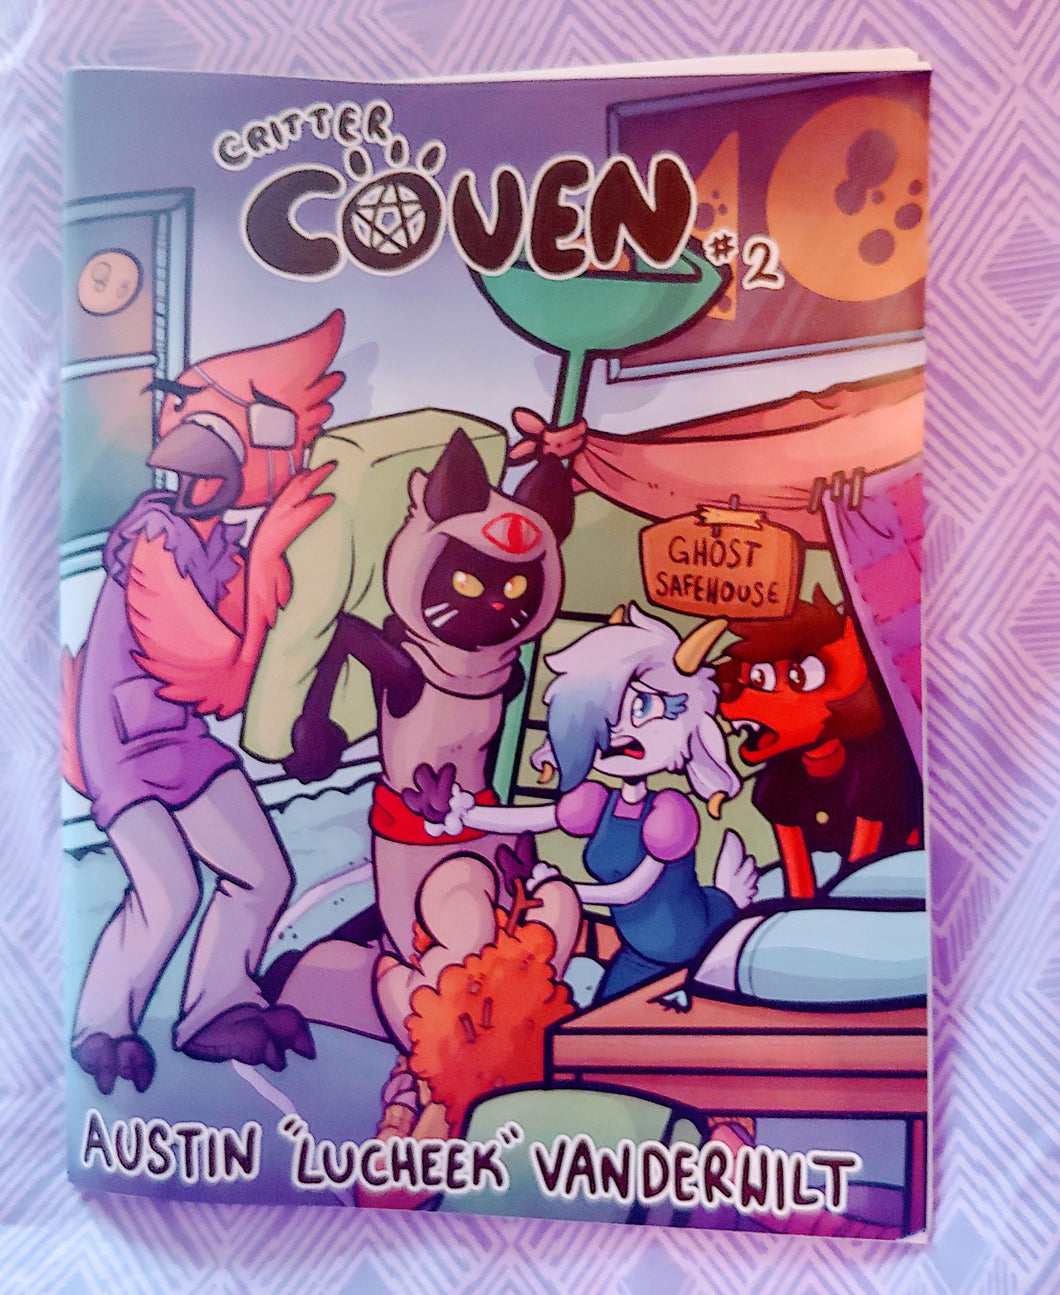 Critter Coven Issue 2